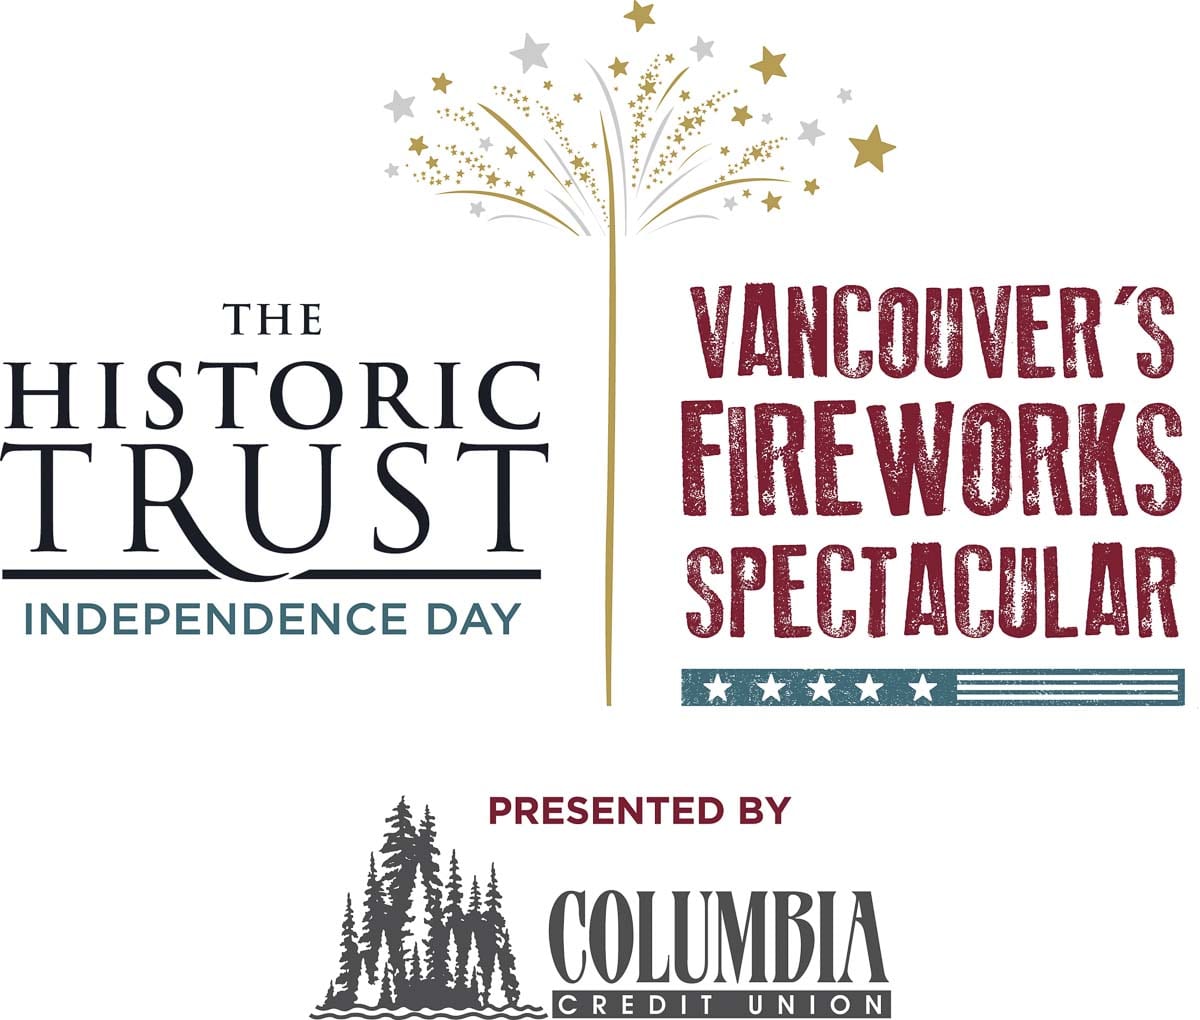 The Historic Trust announced Wednesday the cancelation of the 57th Annual Vancouver Fireworks Spectacular at Fort Vancouver National Site. Due to the current Coronavirus pandemic, the organization wants to be responsible and ensure the safety and health of the community by canceling the event.